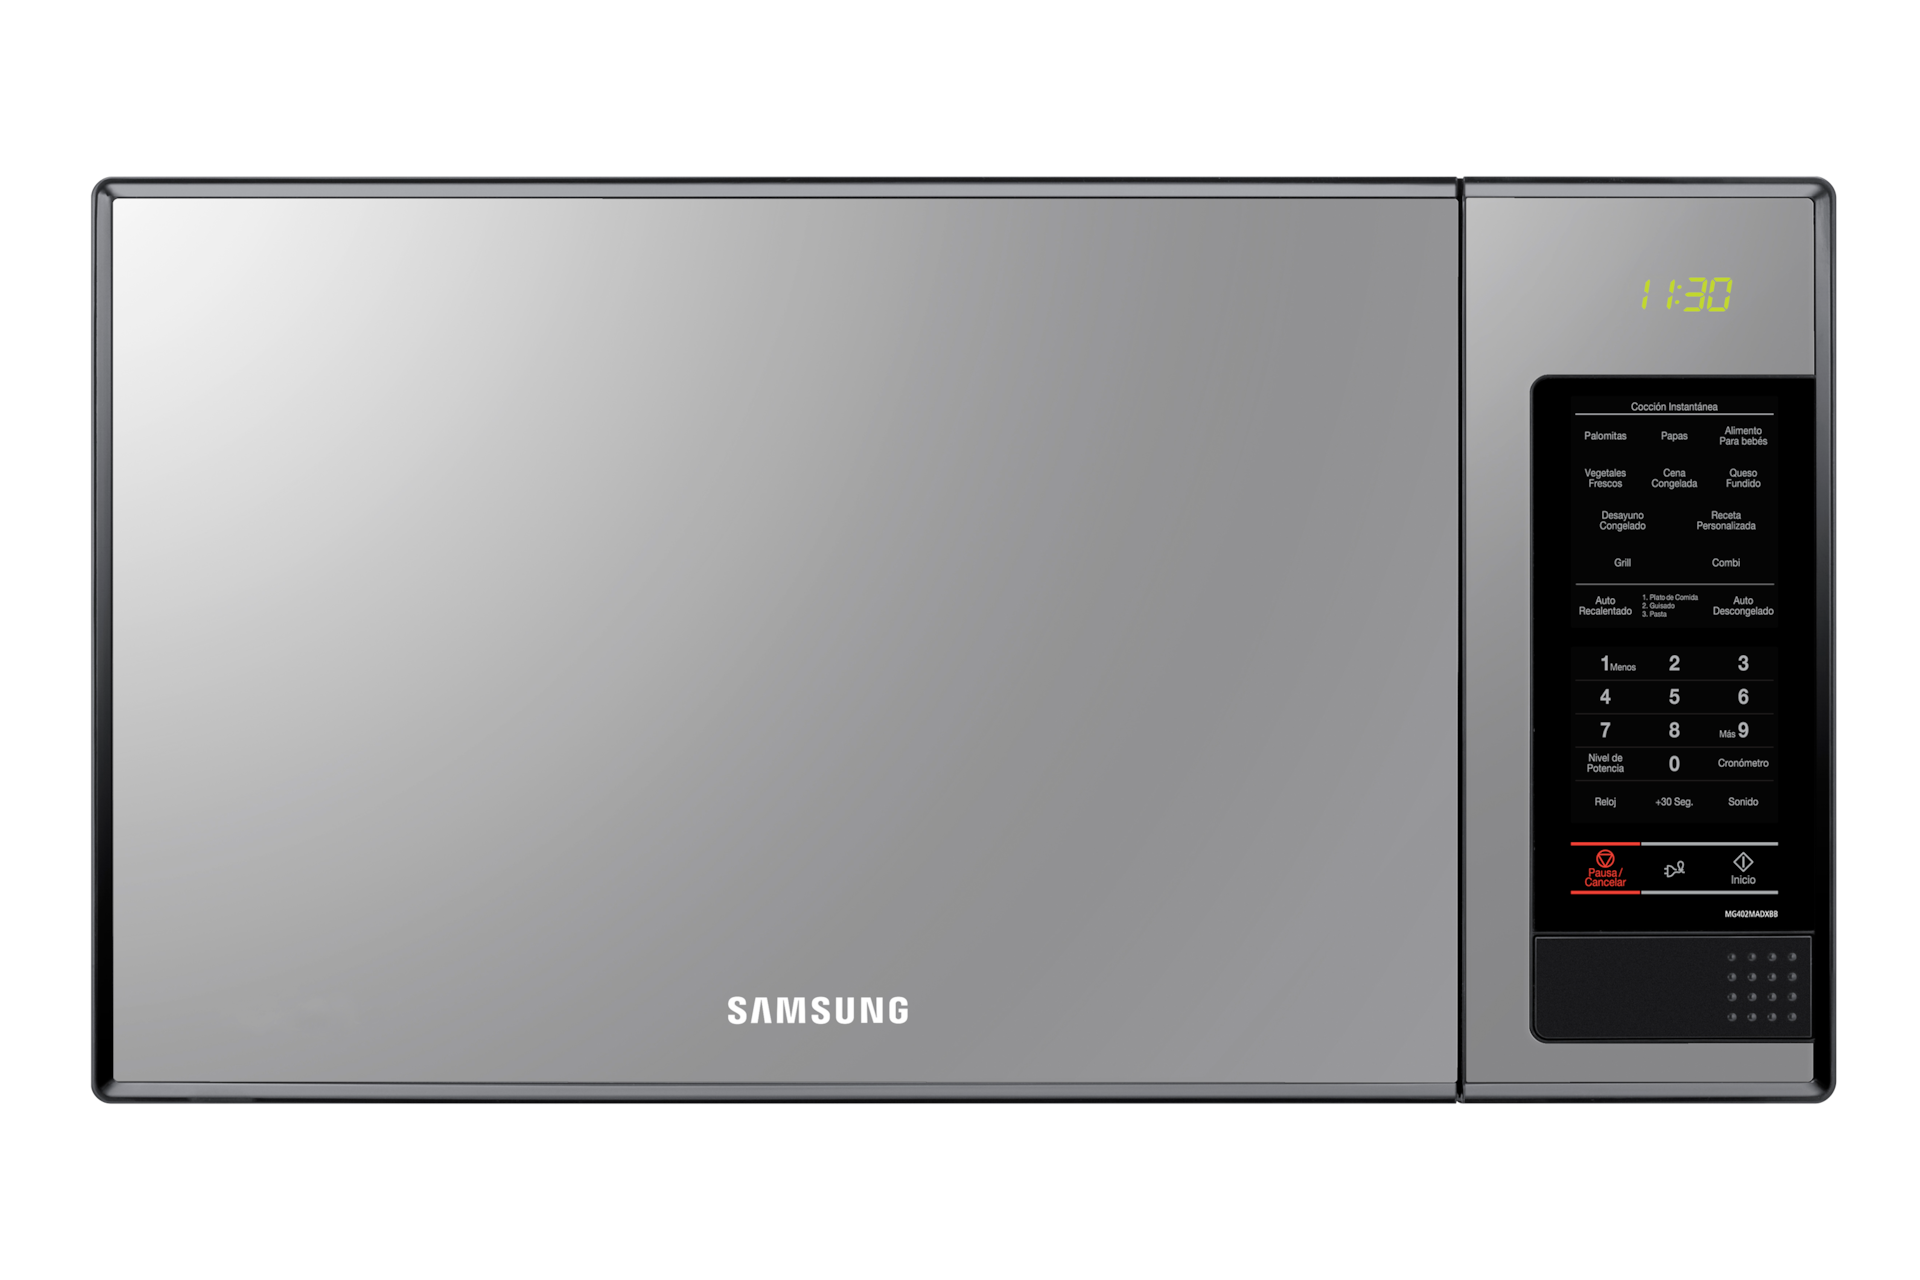 Samsung 40L, Grill, Microwave Oven, with Auto Cook, MG402MADXBB in Silver